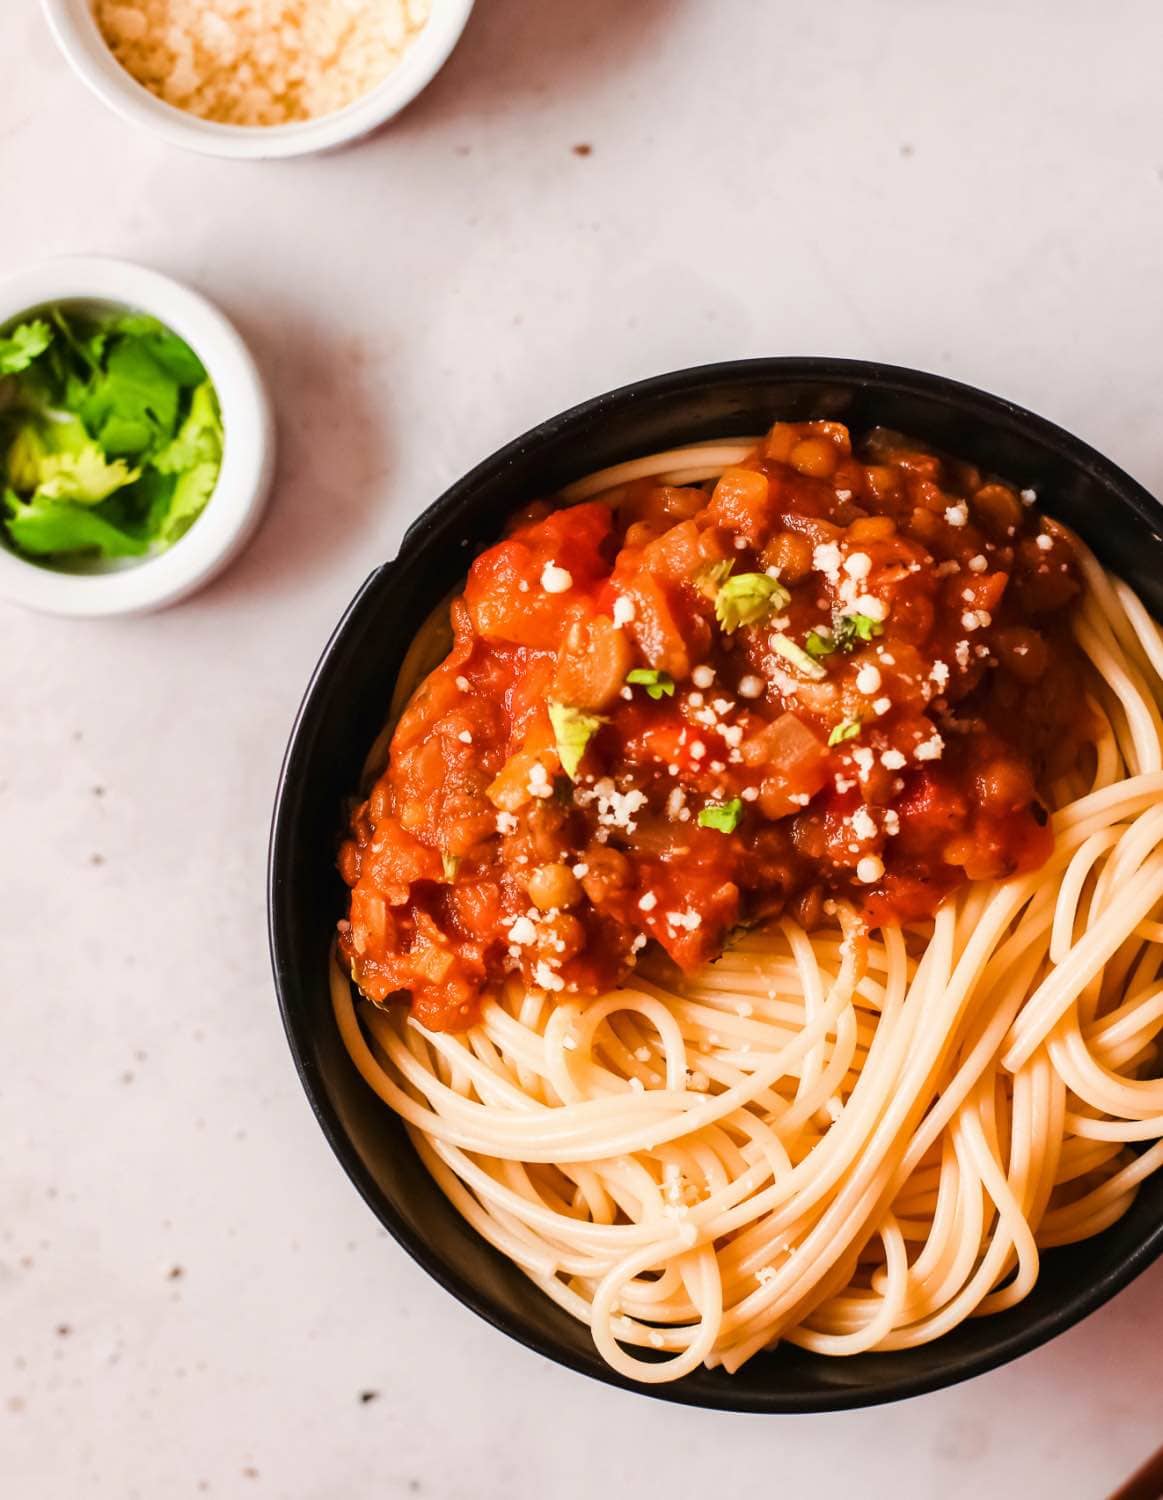 This delicious Instant Pot spaghetti bolognese will add a hearty feel to your dining table this season. Its aroma from the meat and vegetables will fill your home and entice everyone to the dining table.